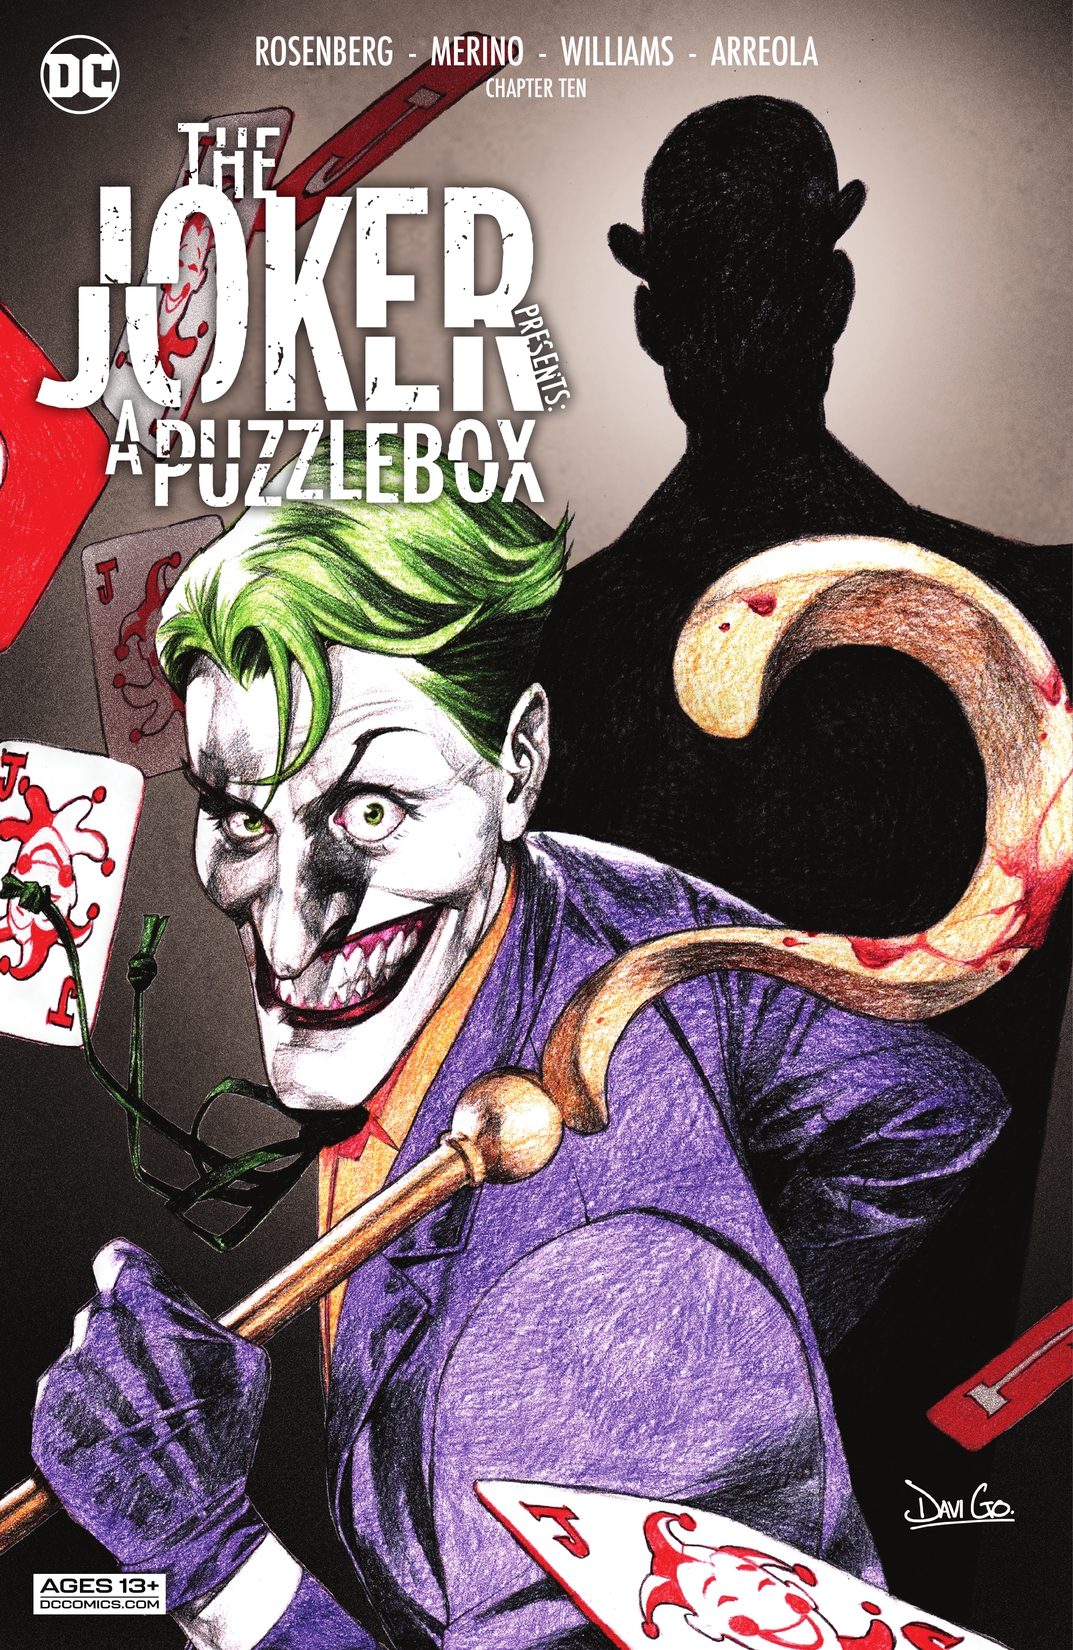 The Joker Presents: A Puzzlebox Director's Cut #10 preview images